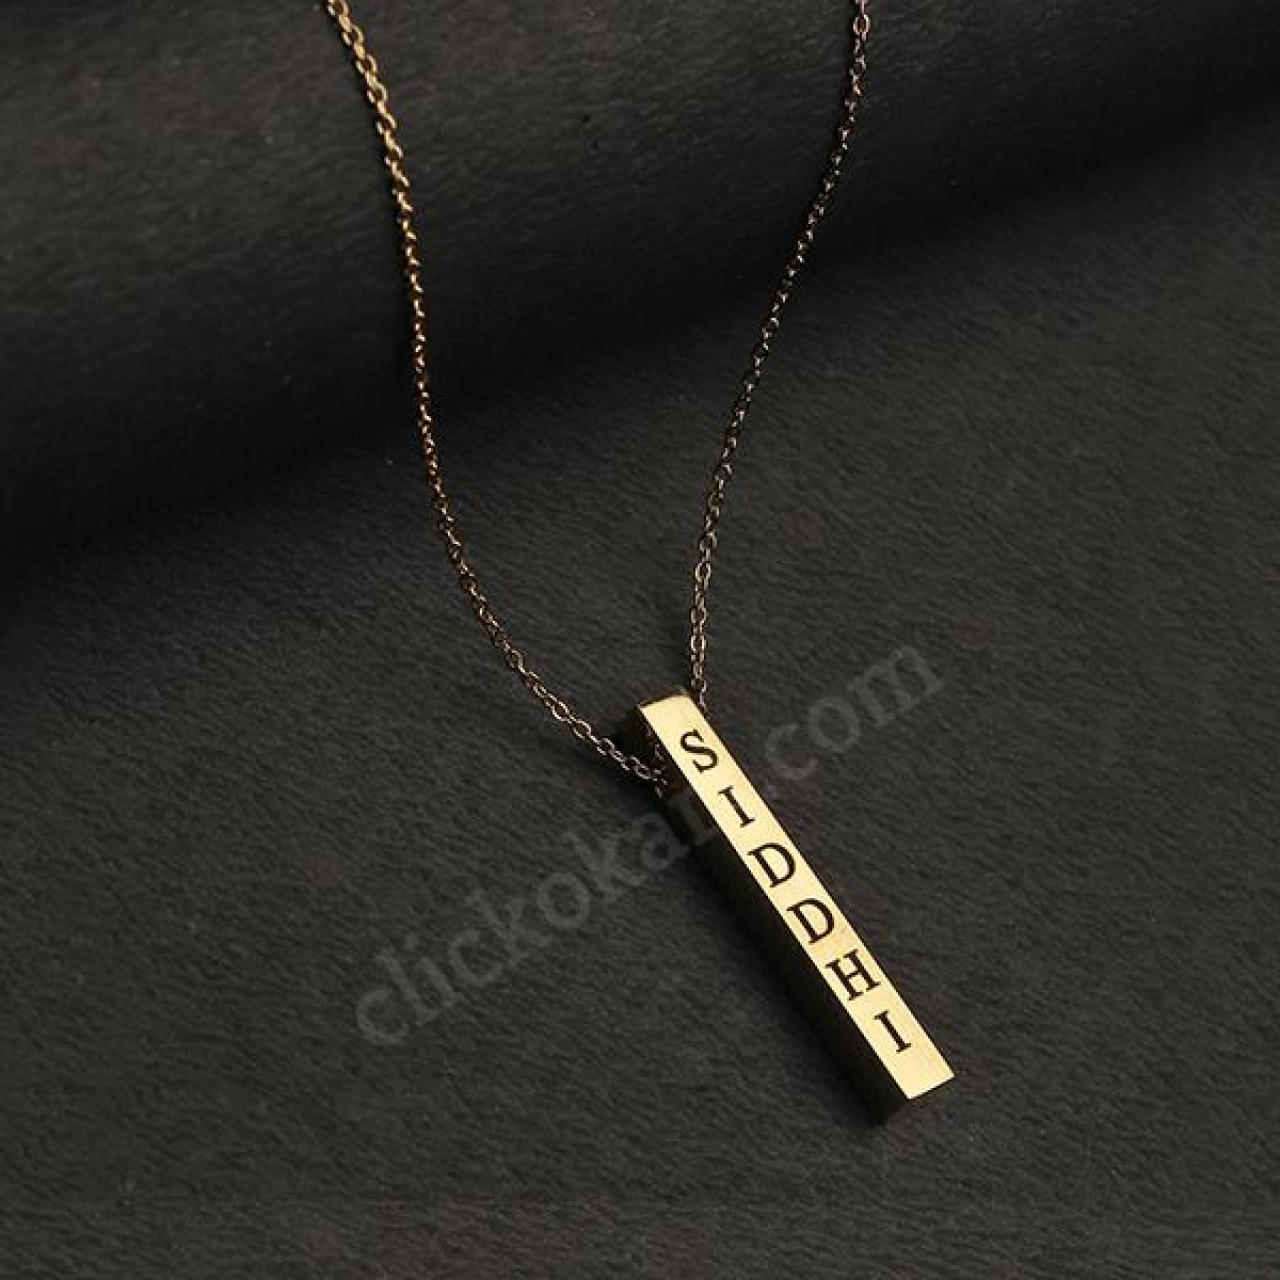 Personalized Metal Bar Pendent